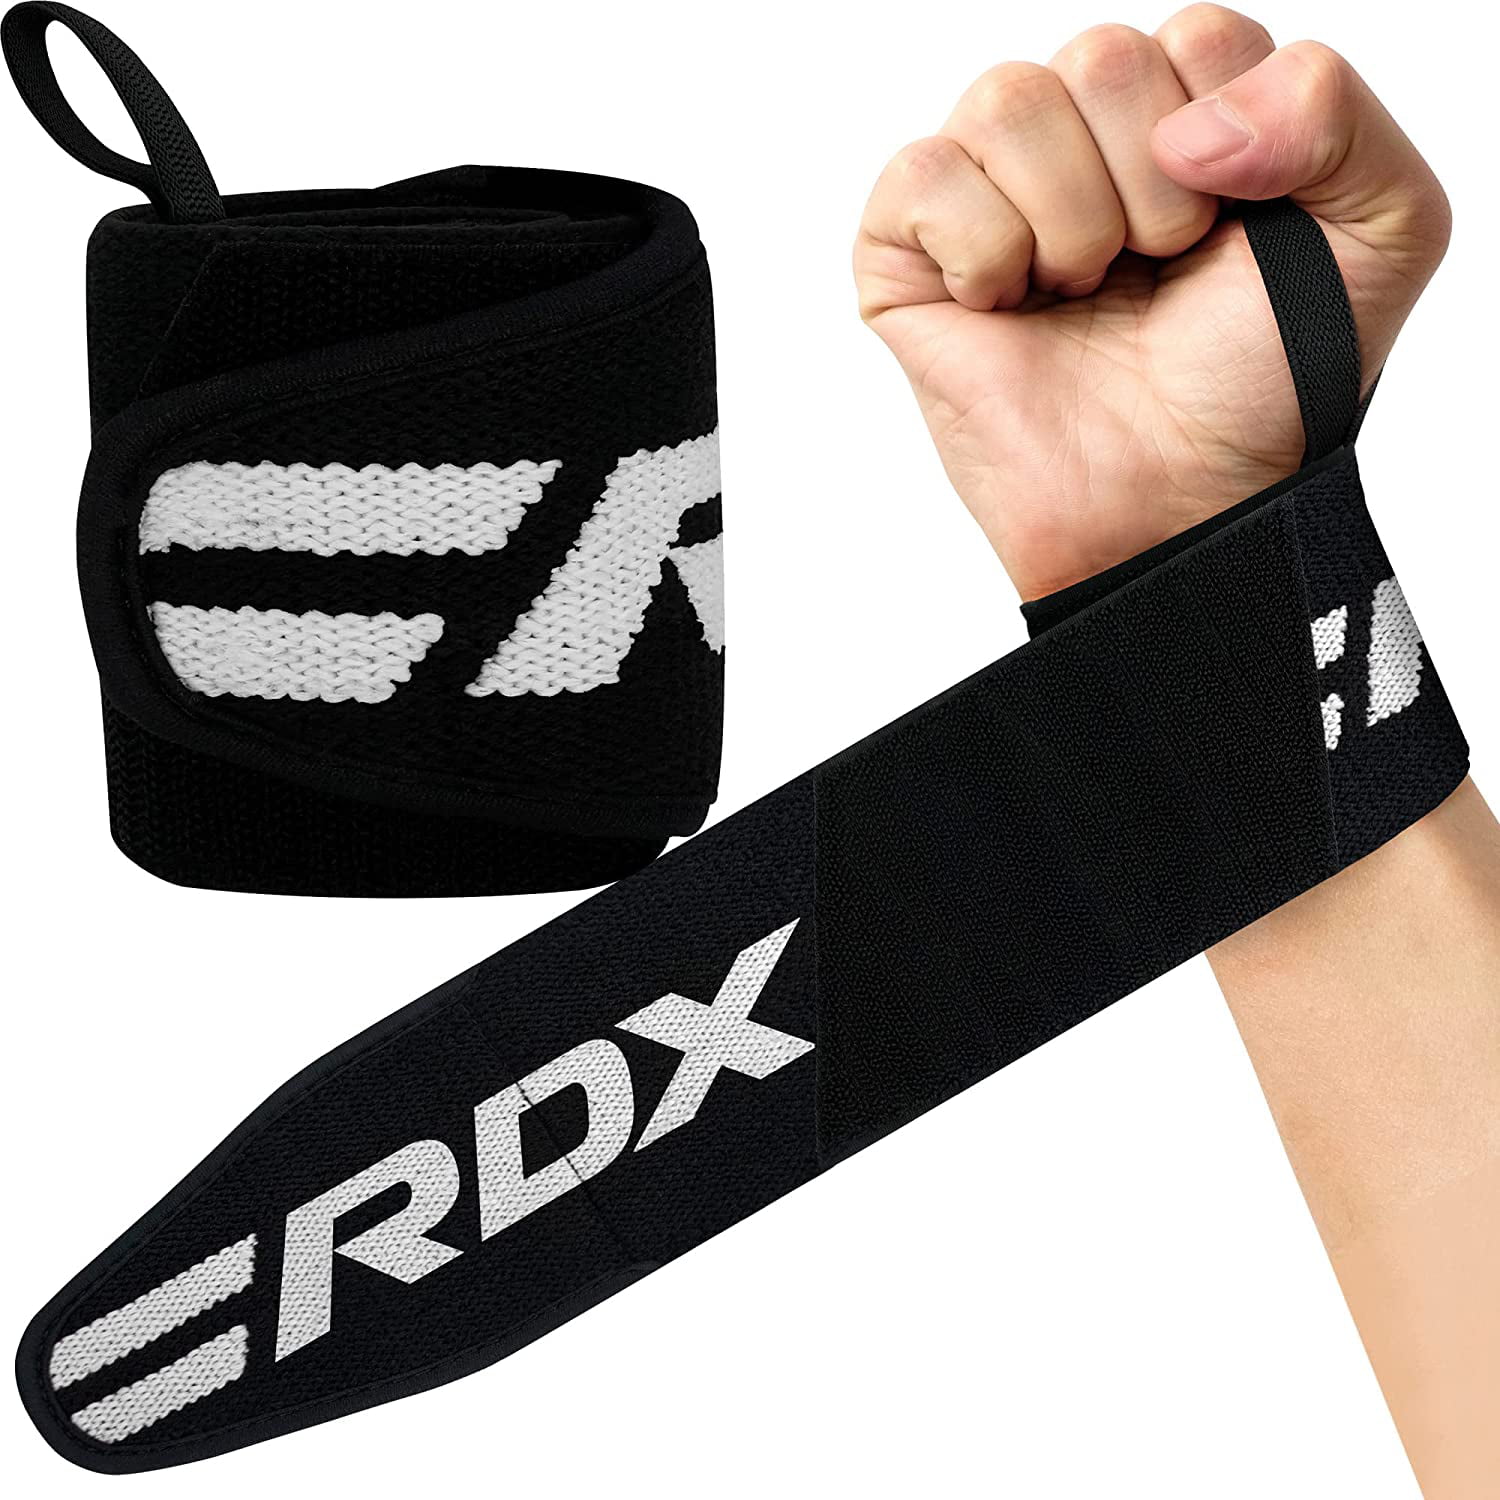 Bodybuilding Strength Training Deadlifts & Fitness Lifting Straps 1 Pair Gym Workout - Padded Wrist Support Wraps for Powerlifting